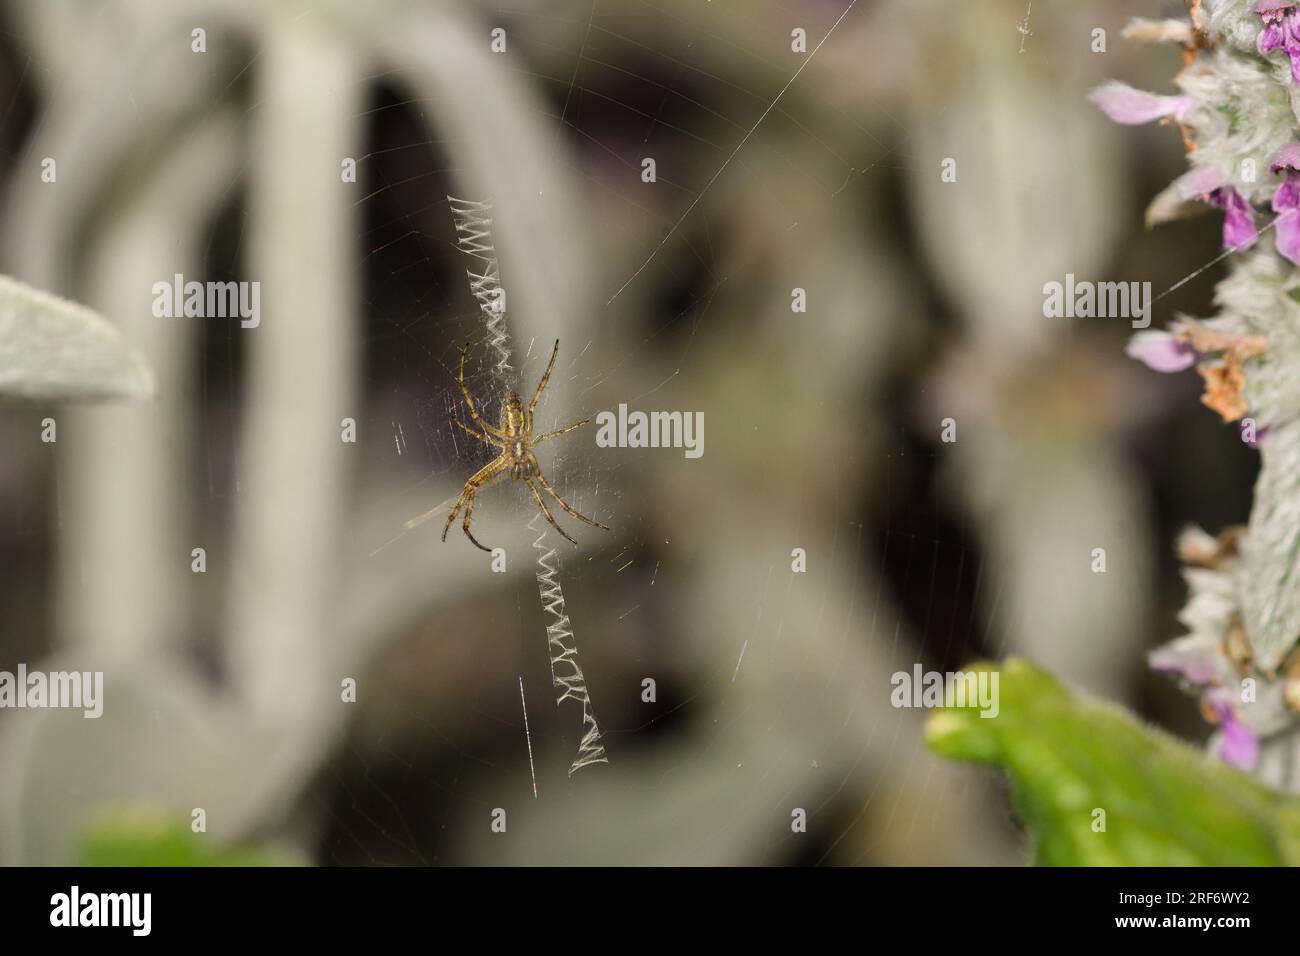 Detail of a spider in its web among the flowers of Stachys lanata Stock Photo